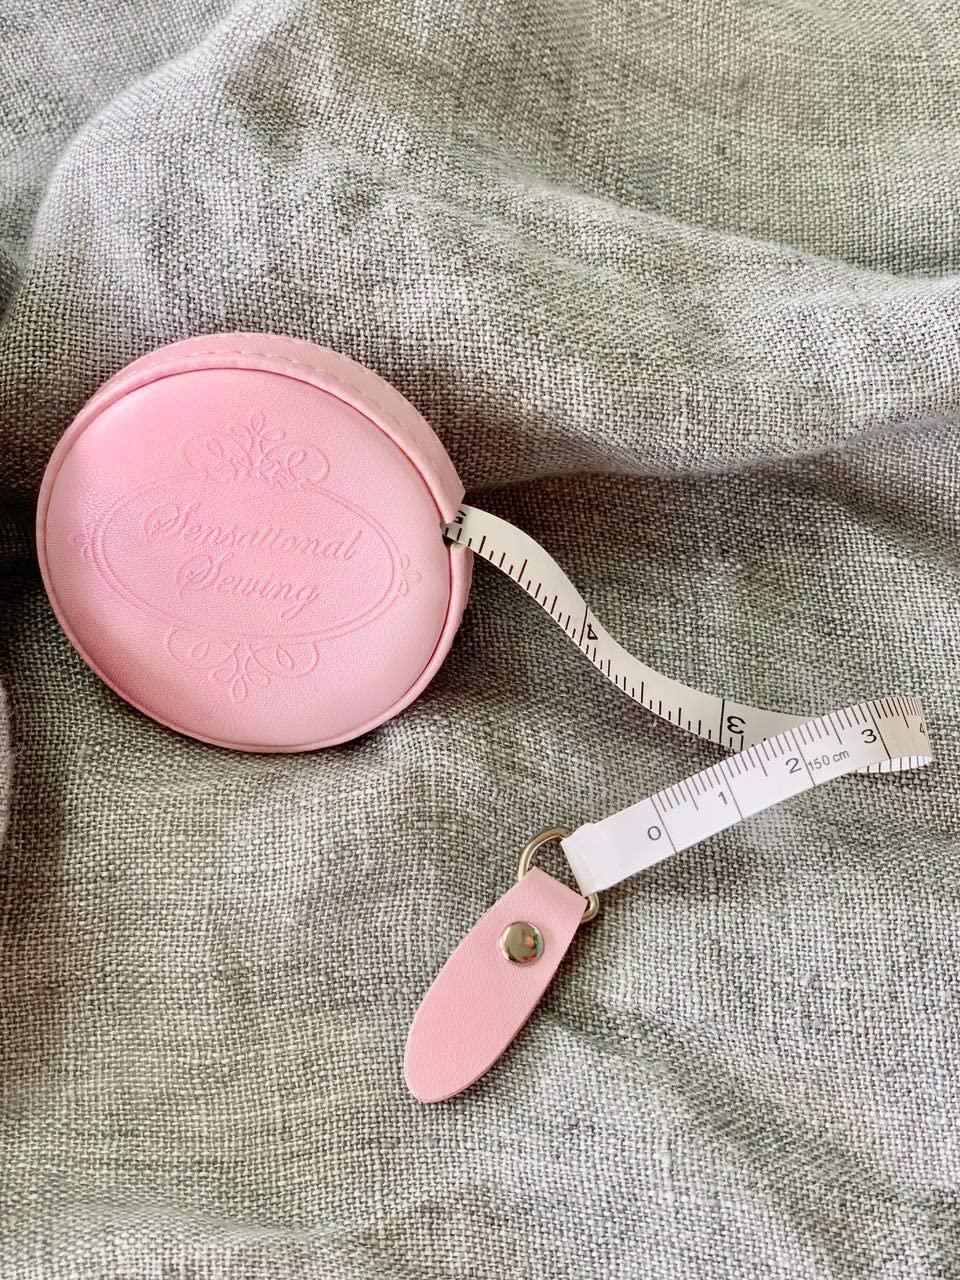 Tape Measure for Sewing. Measuring Tape for Body in a Soft Pink Leatherette  Retractable Case. 60 inches/1.5m. This Flexible Tape Measure is Perfect for Measuring  Fabric Cloth Quilting and Much More.